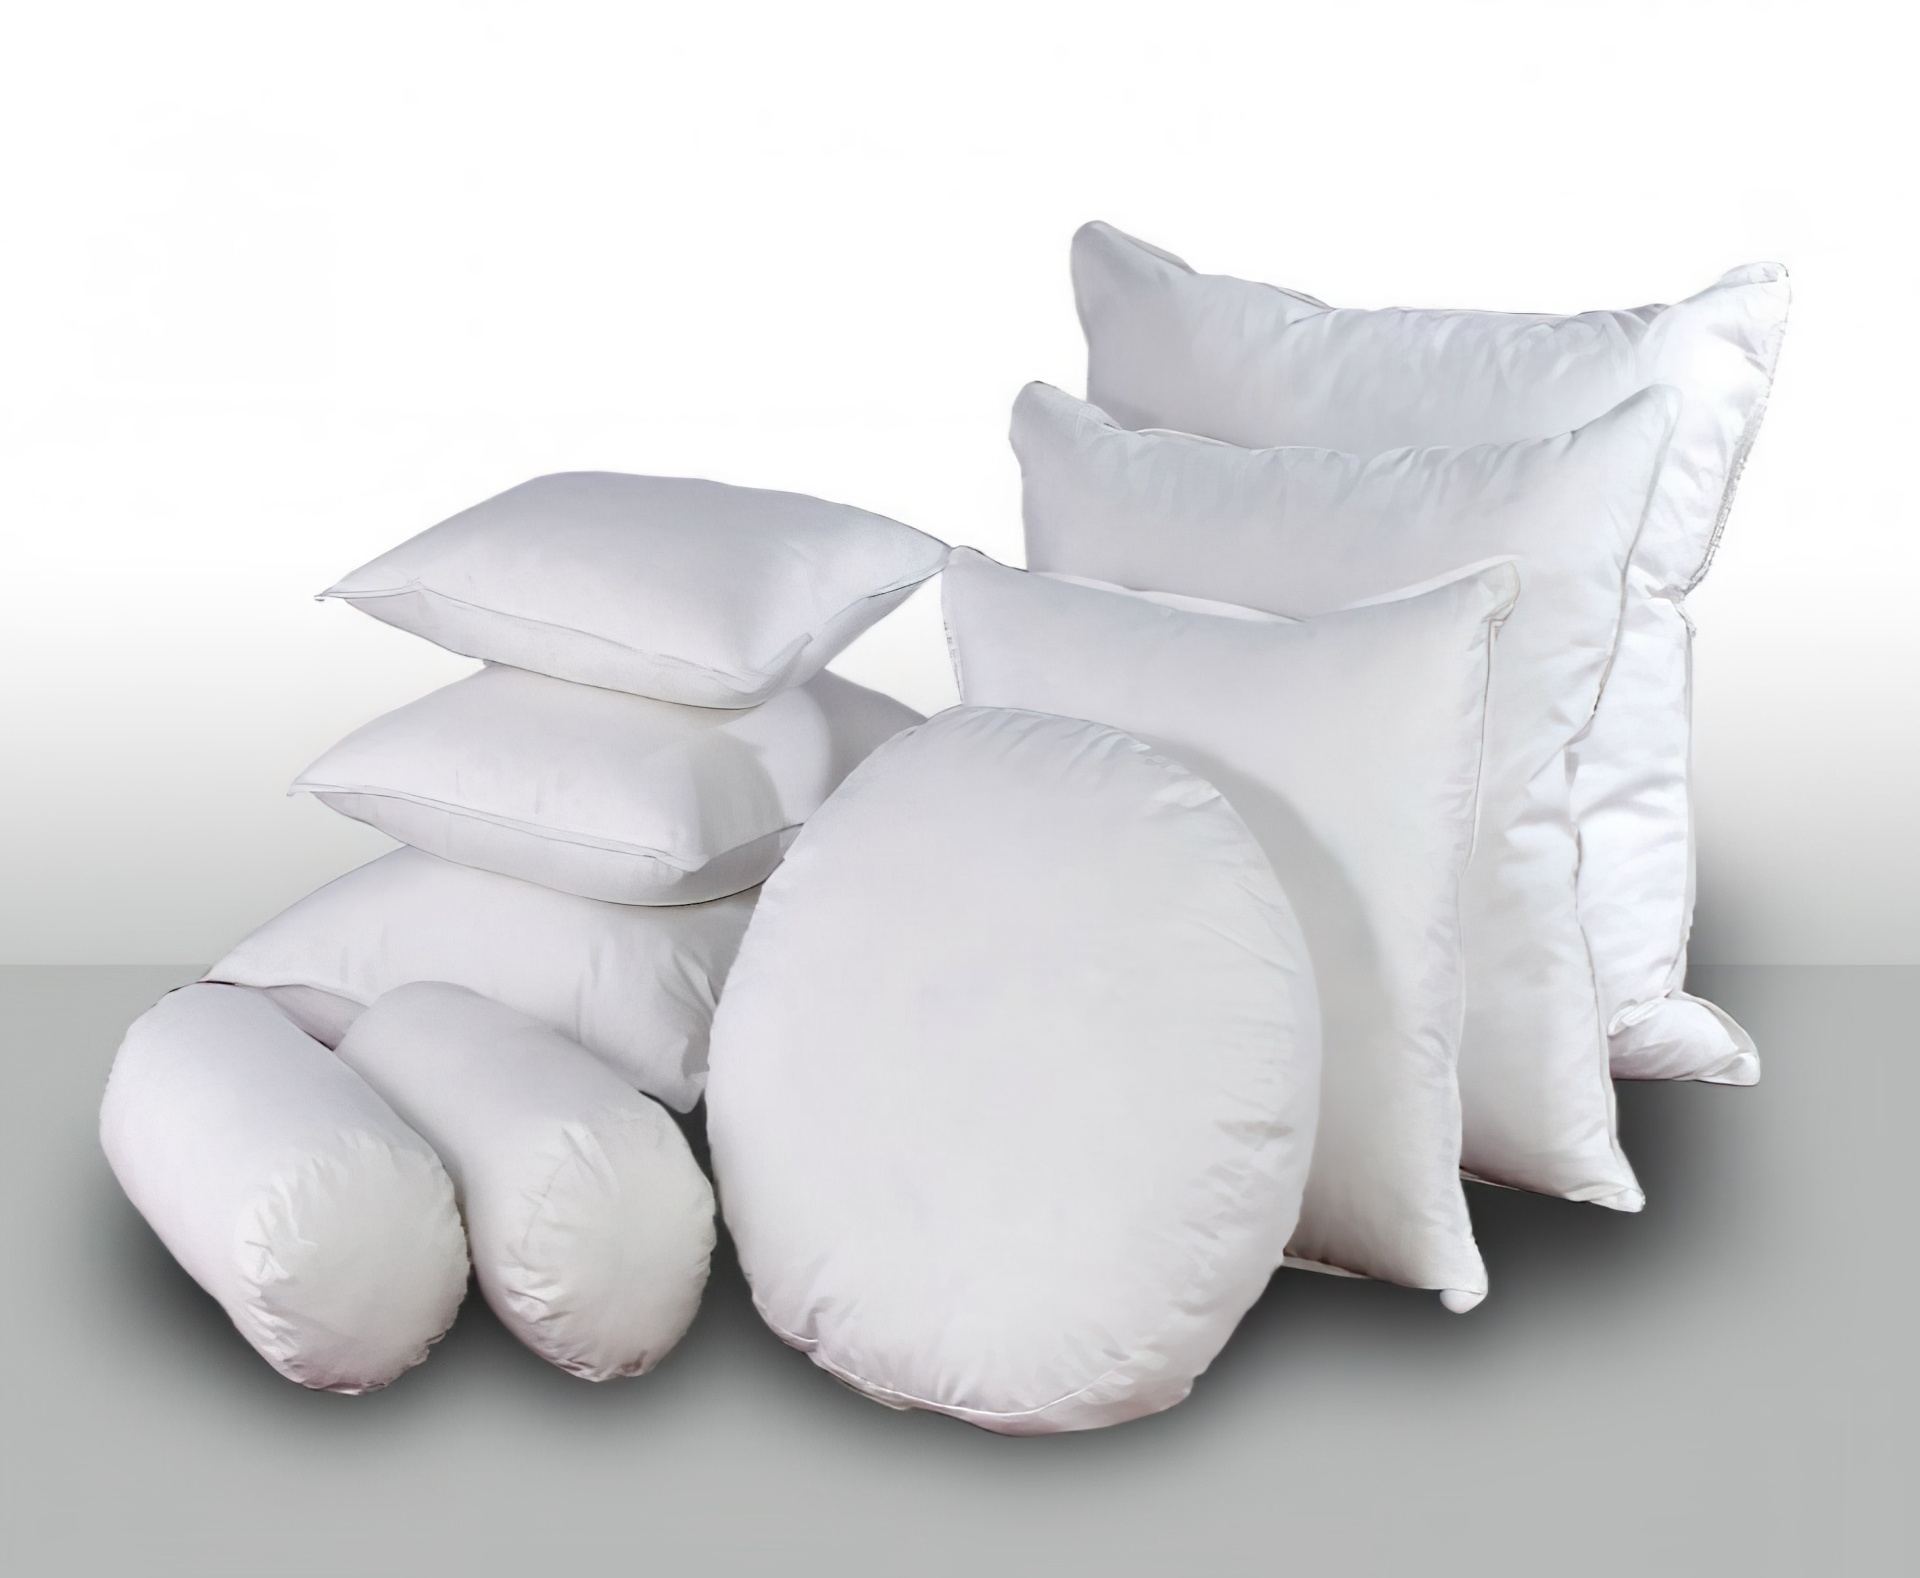 https://www.thecleanbedroom.com/wp-content/uploads/products/22186/downright-mackenza-50-50-white-down-feather-decorative-pillow-inserts--22186-.jpg